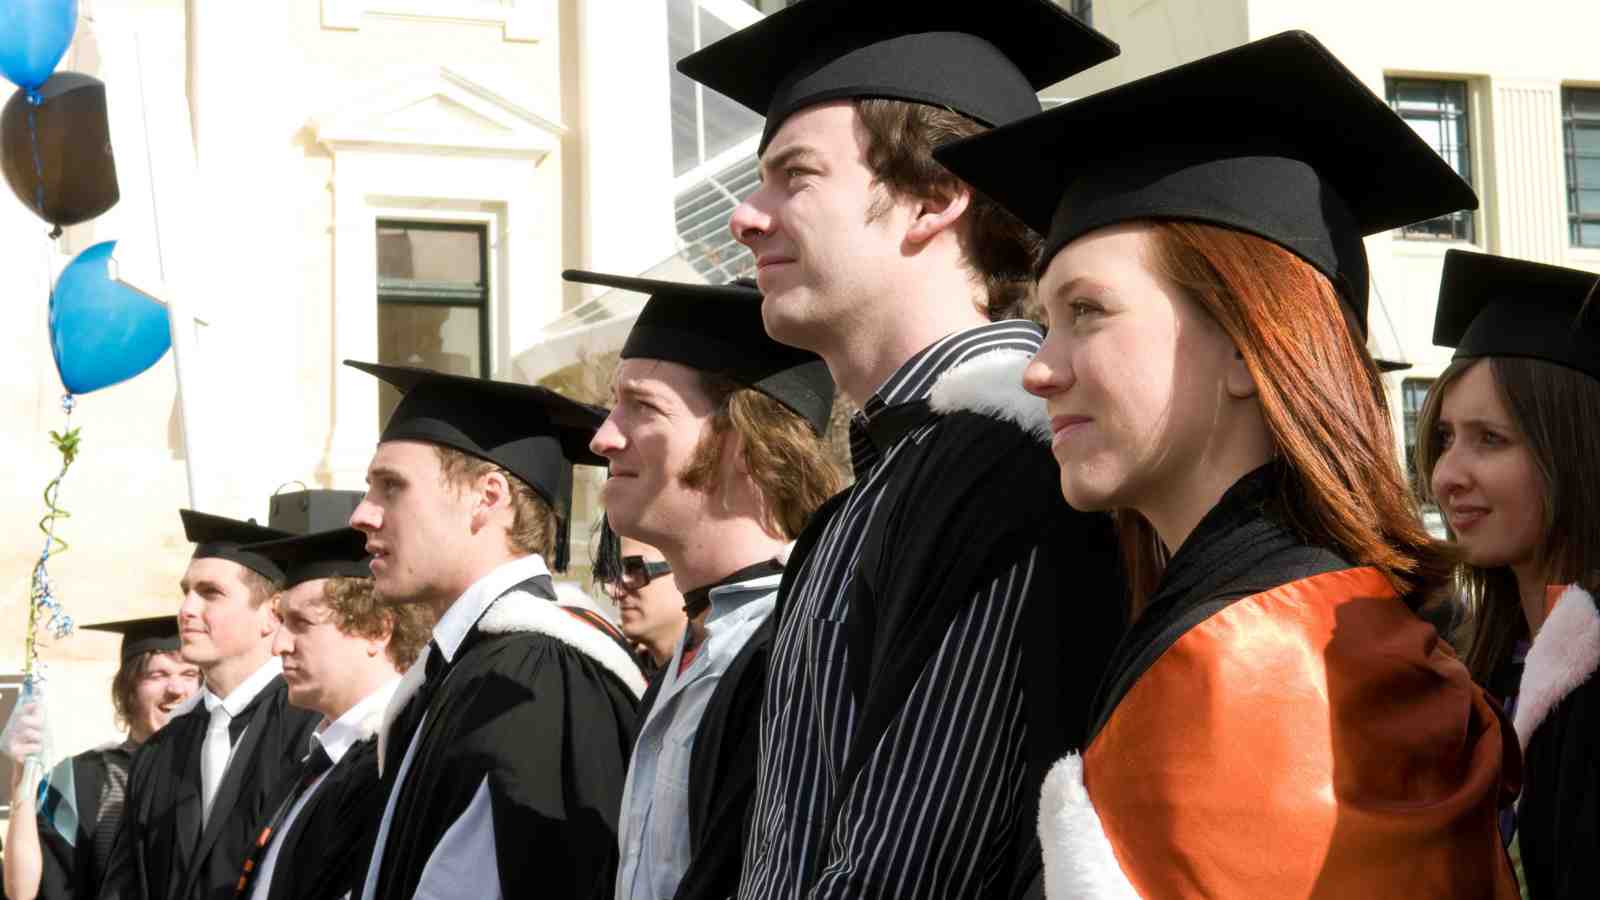 Victoria University ranking coursed and fee for international students